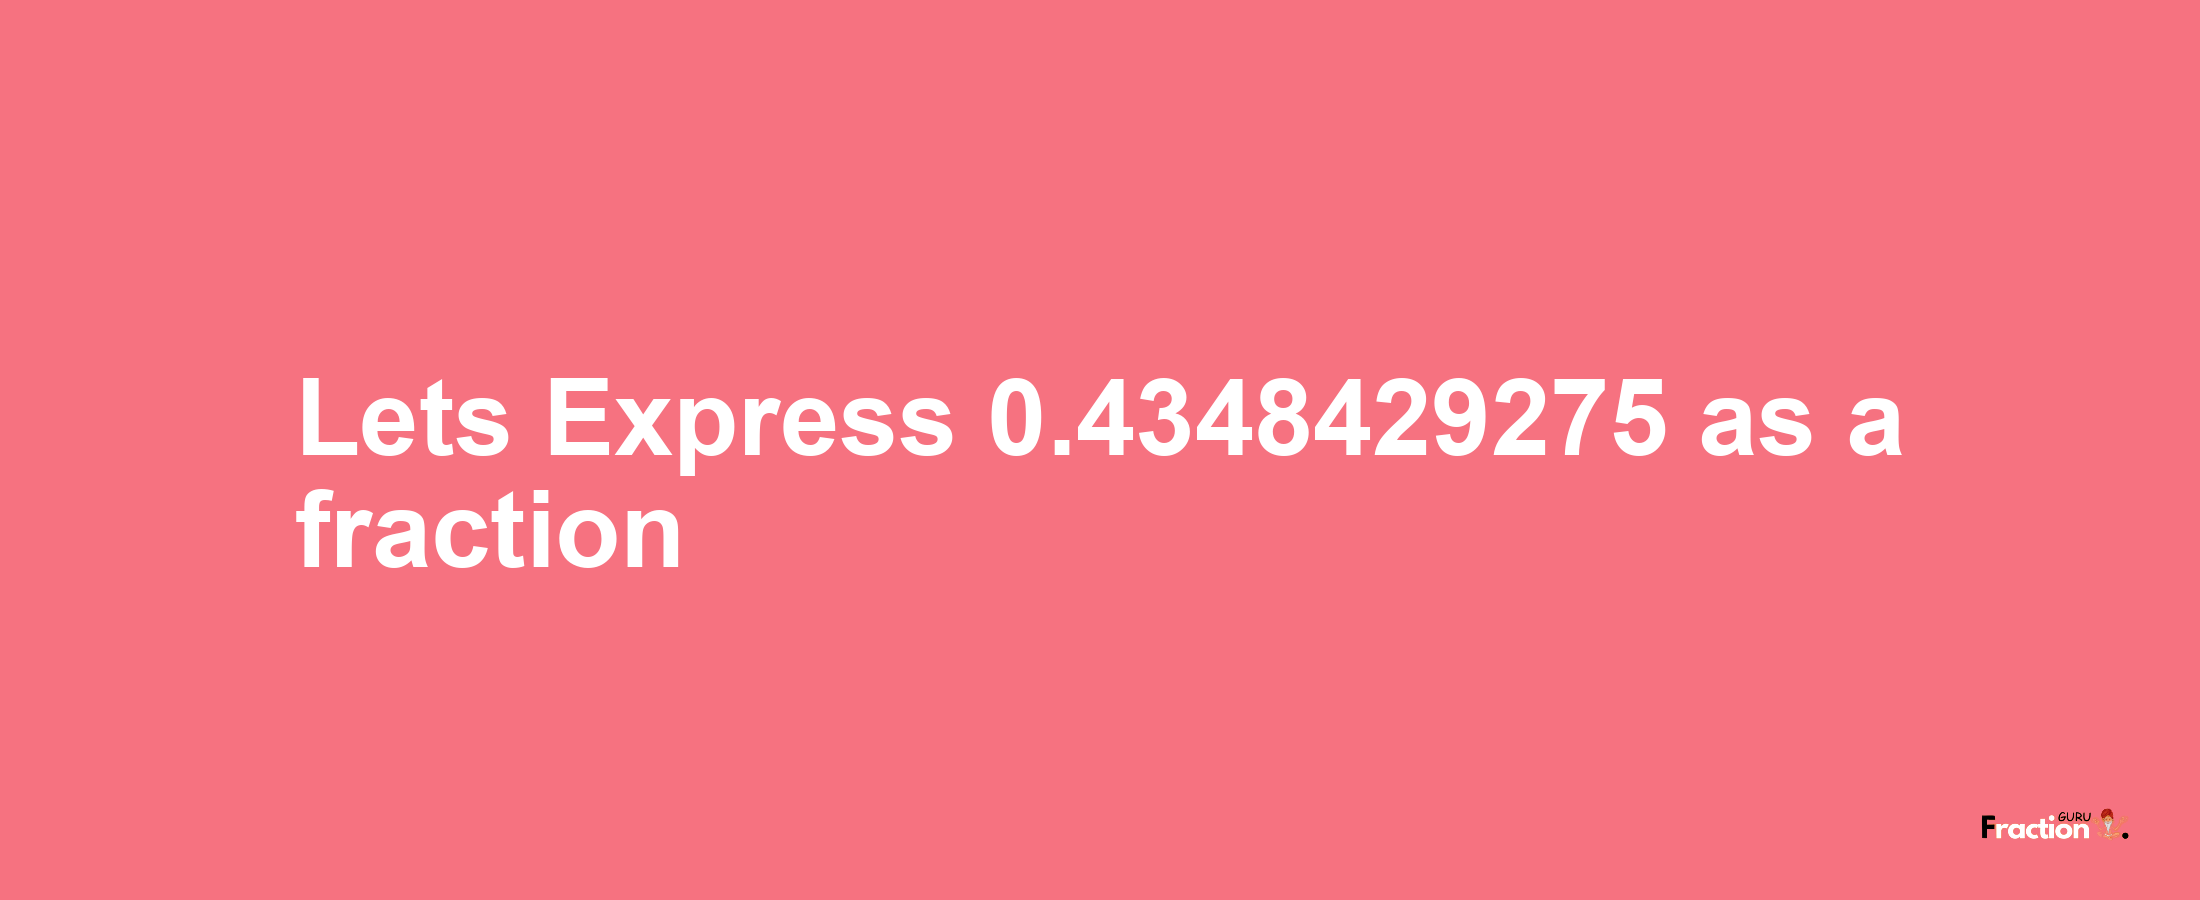 Lets Express 0.4348429275 as afraction